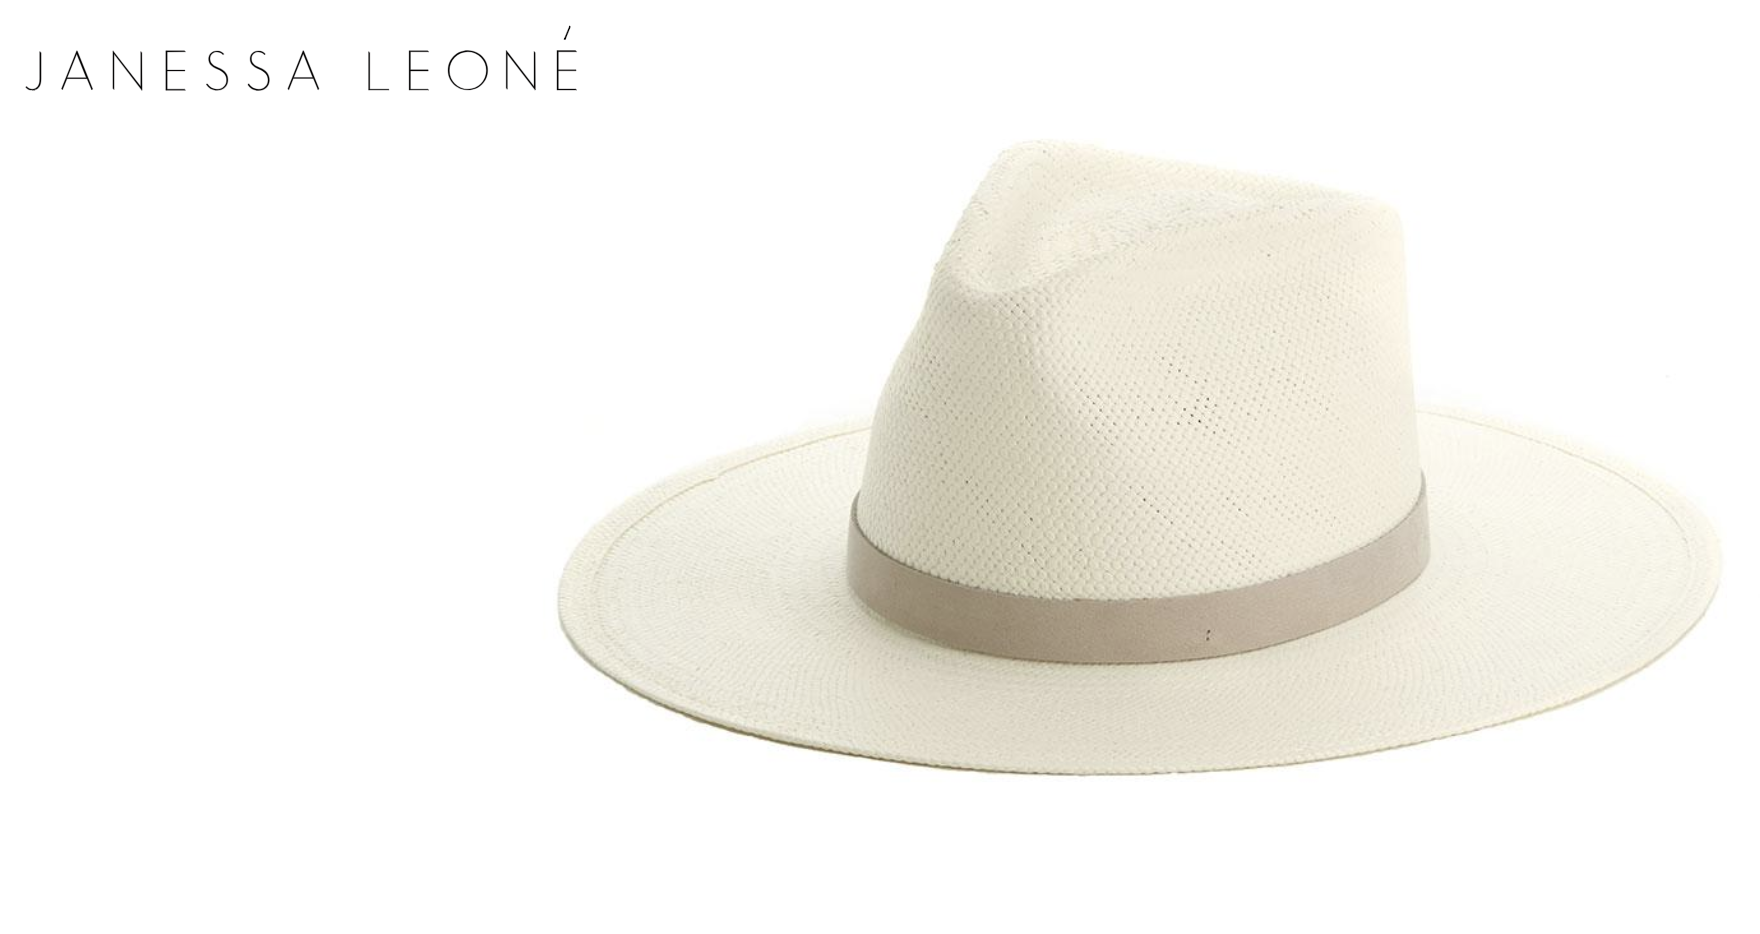 Janessa Leone’ Packable Straw Hat